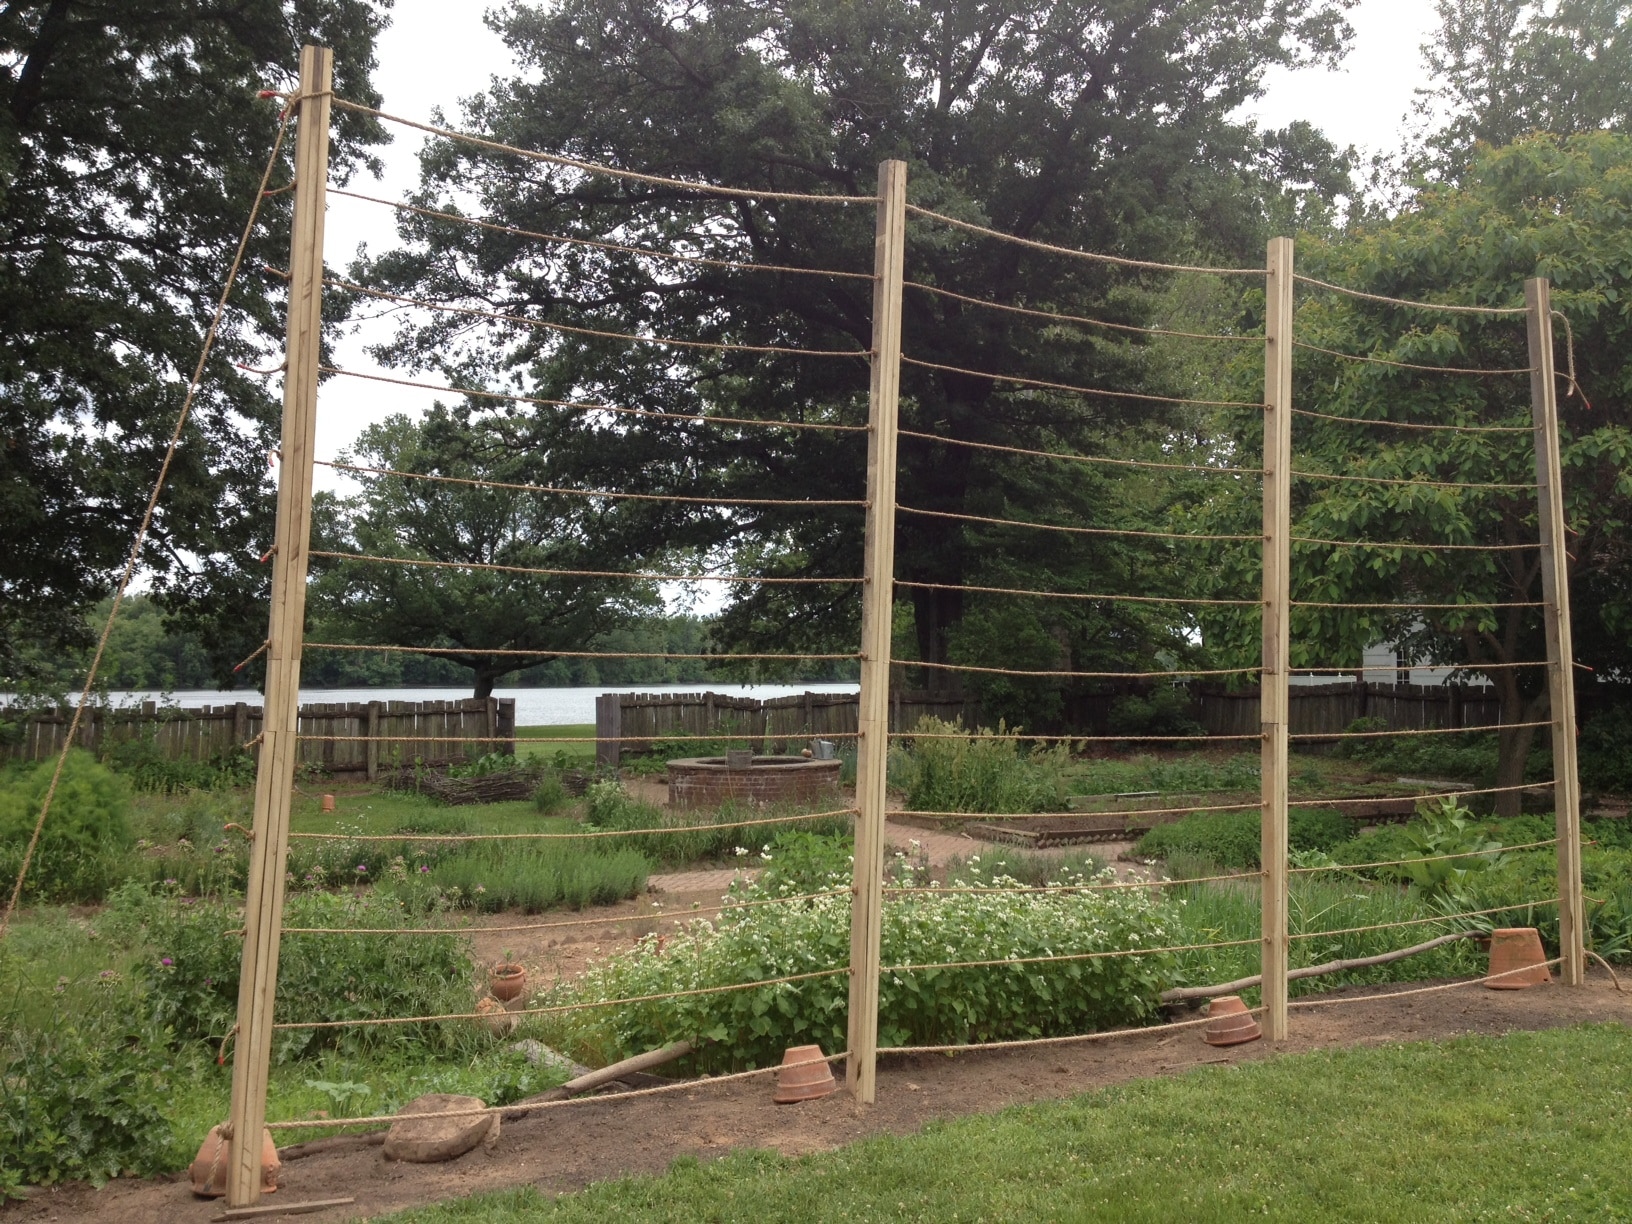 Pennsbury Garden Features Rope Hops Wall